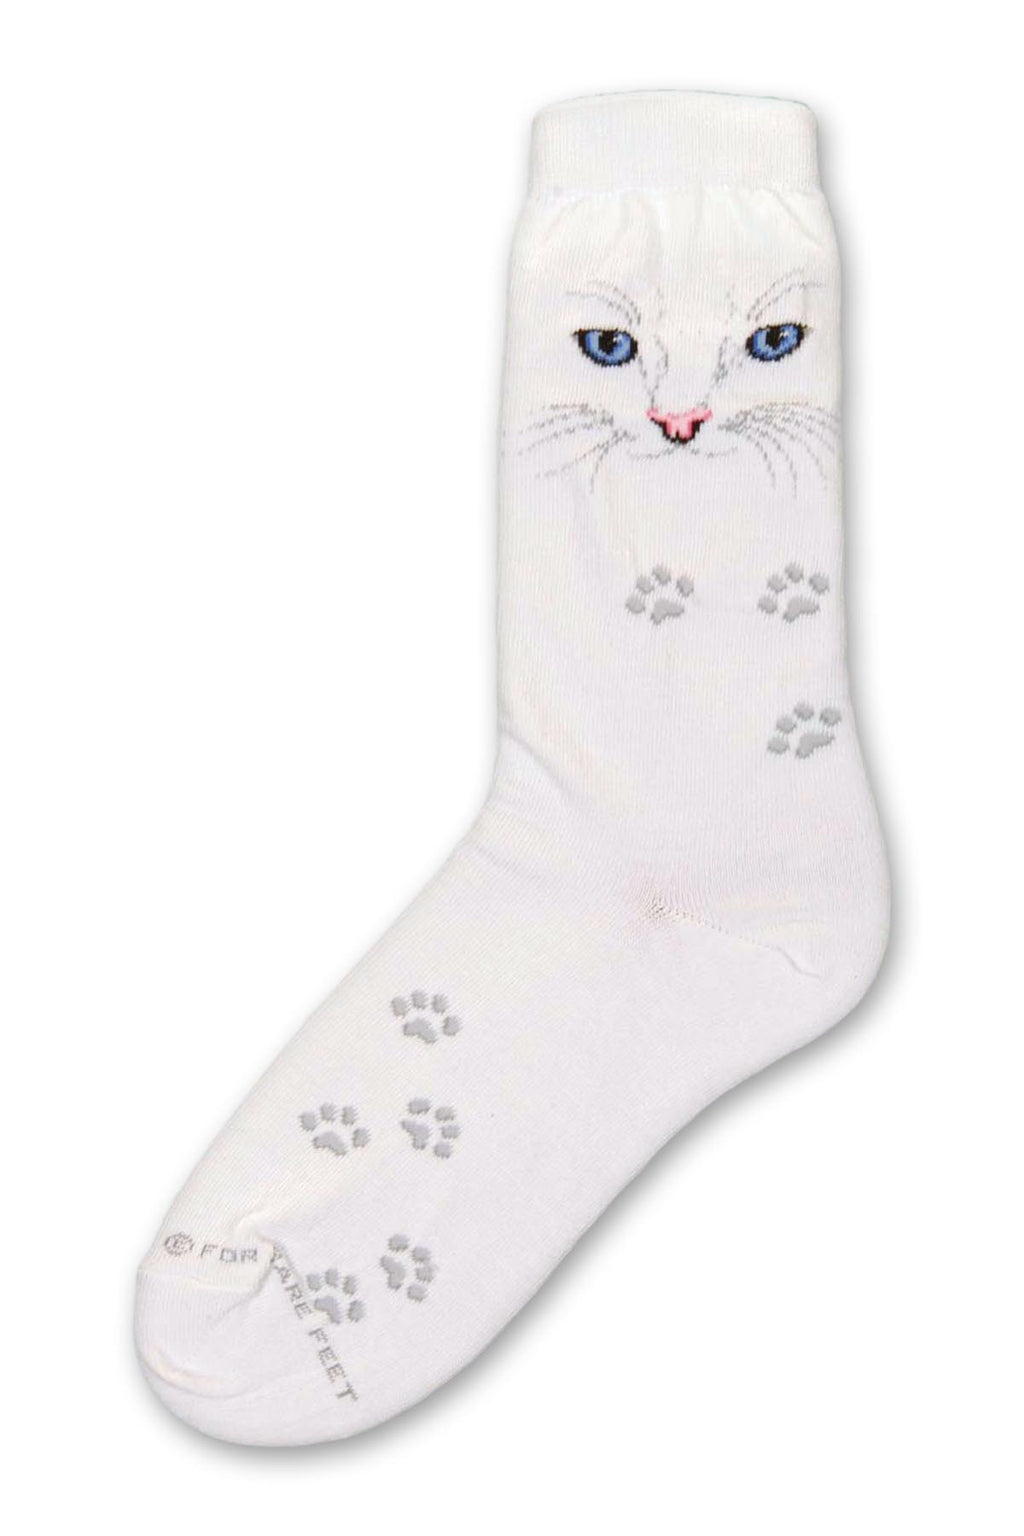 On a Bright White background is the Face of a Cat with Blue Eyes and a Pink Nose with Grey Whiskers. Paws of Grey follow the sock down to the Toes.